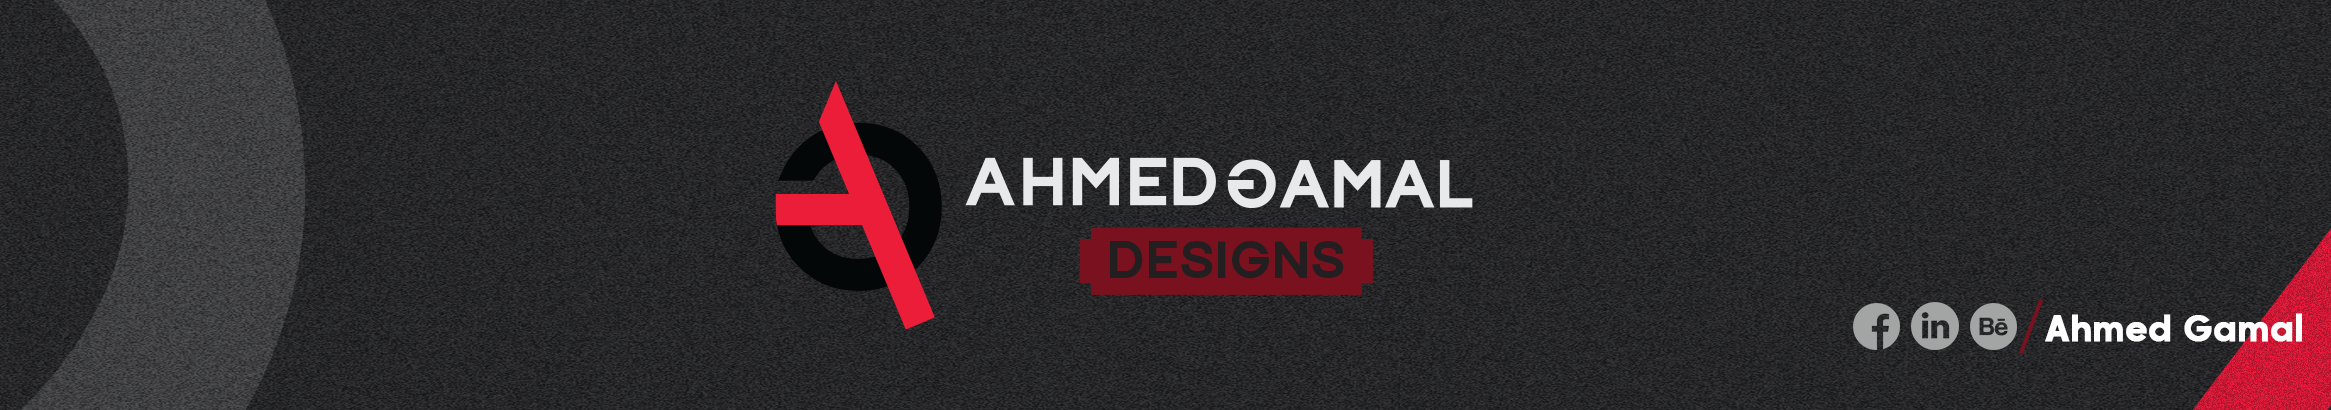 Ahmed Gamal's profile banner